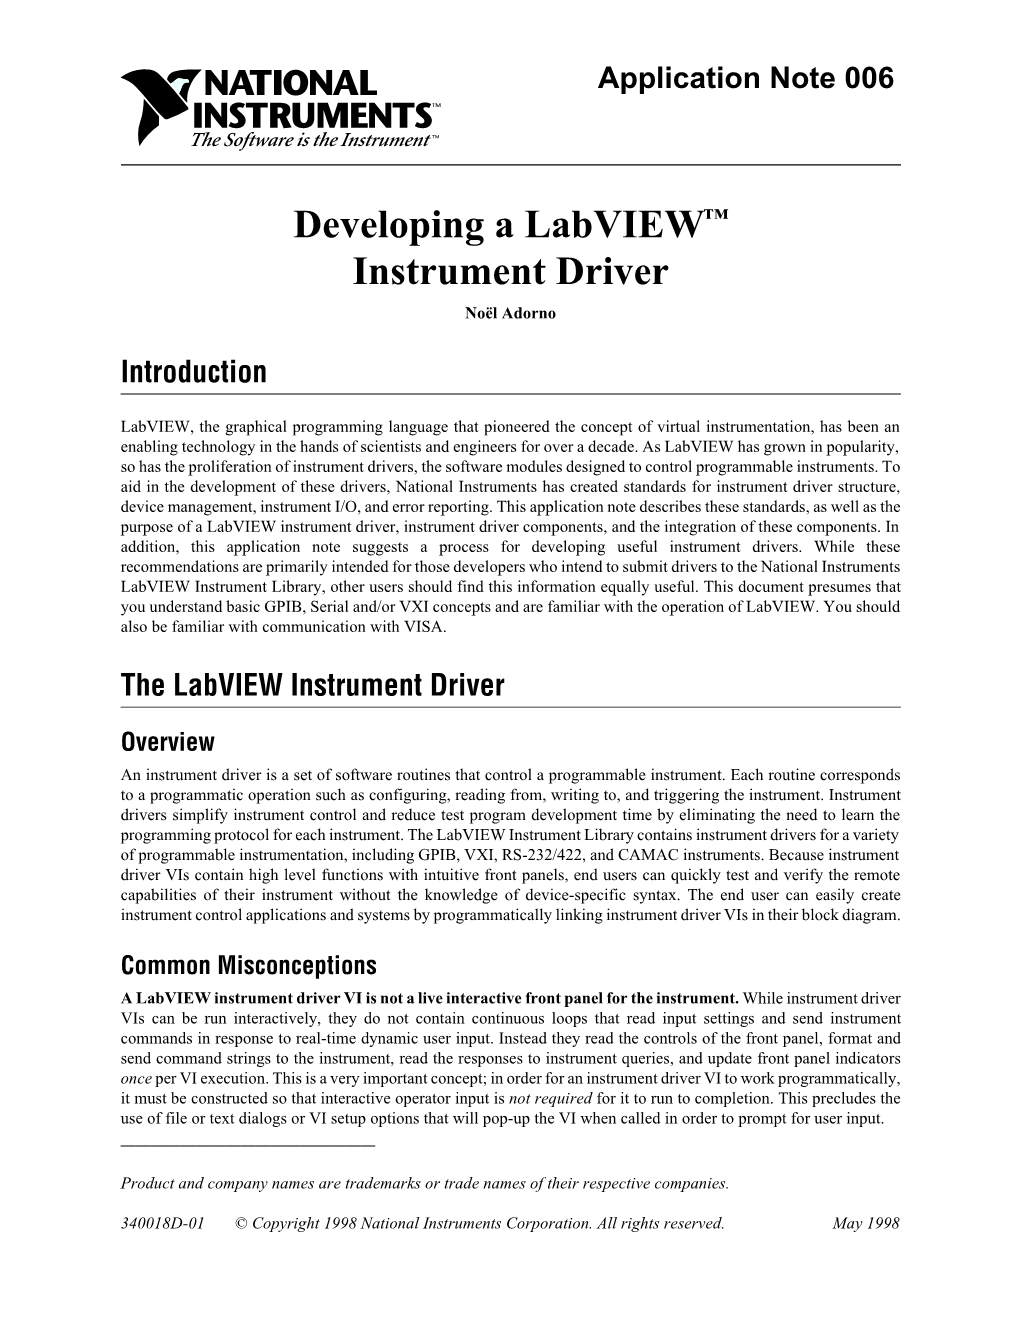 Developing a Labview™ Instrument Driver Noël Adorno